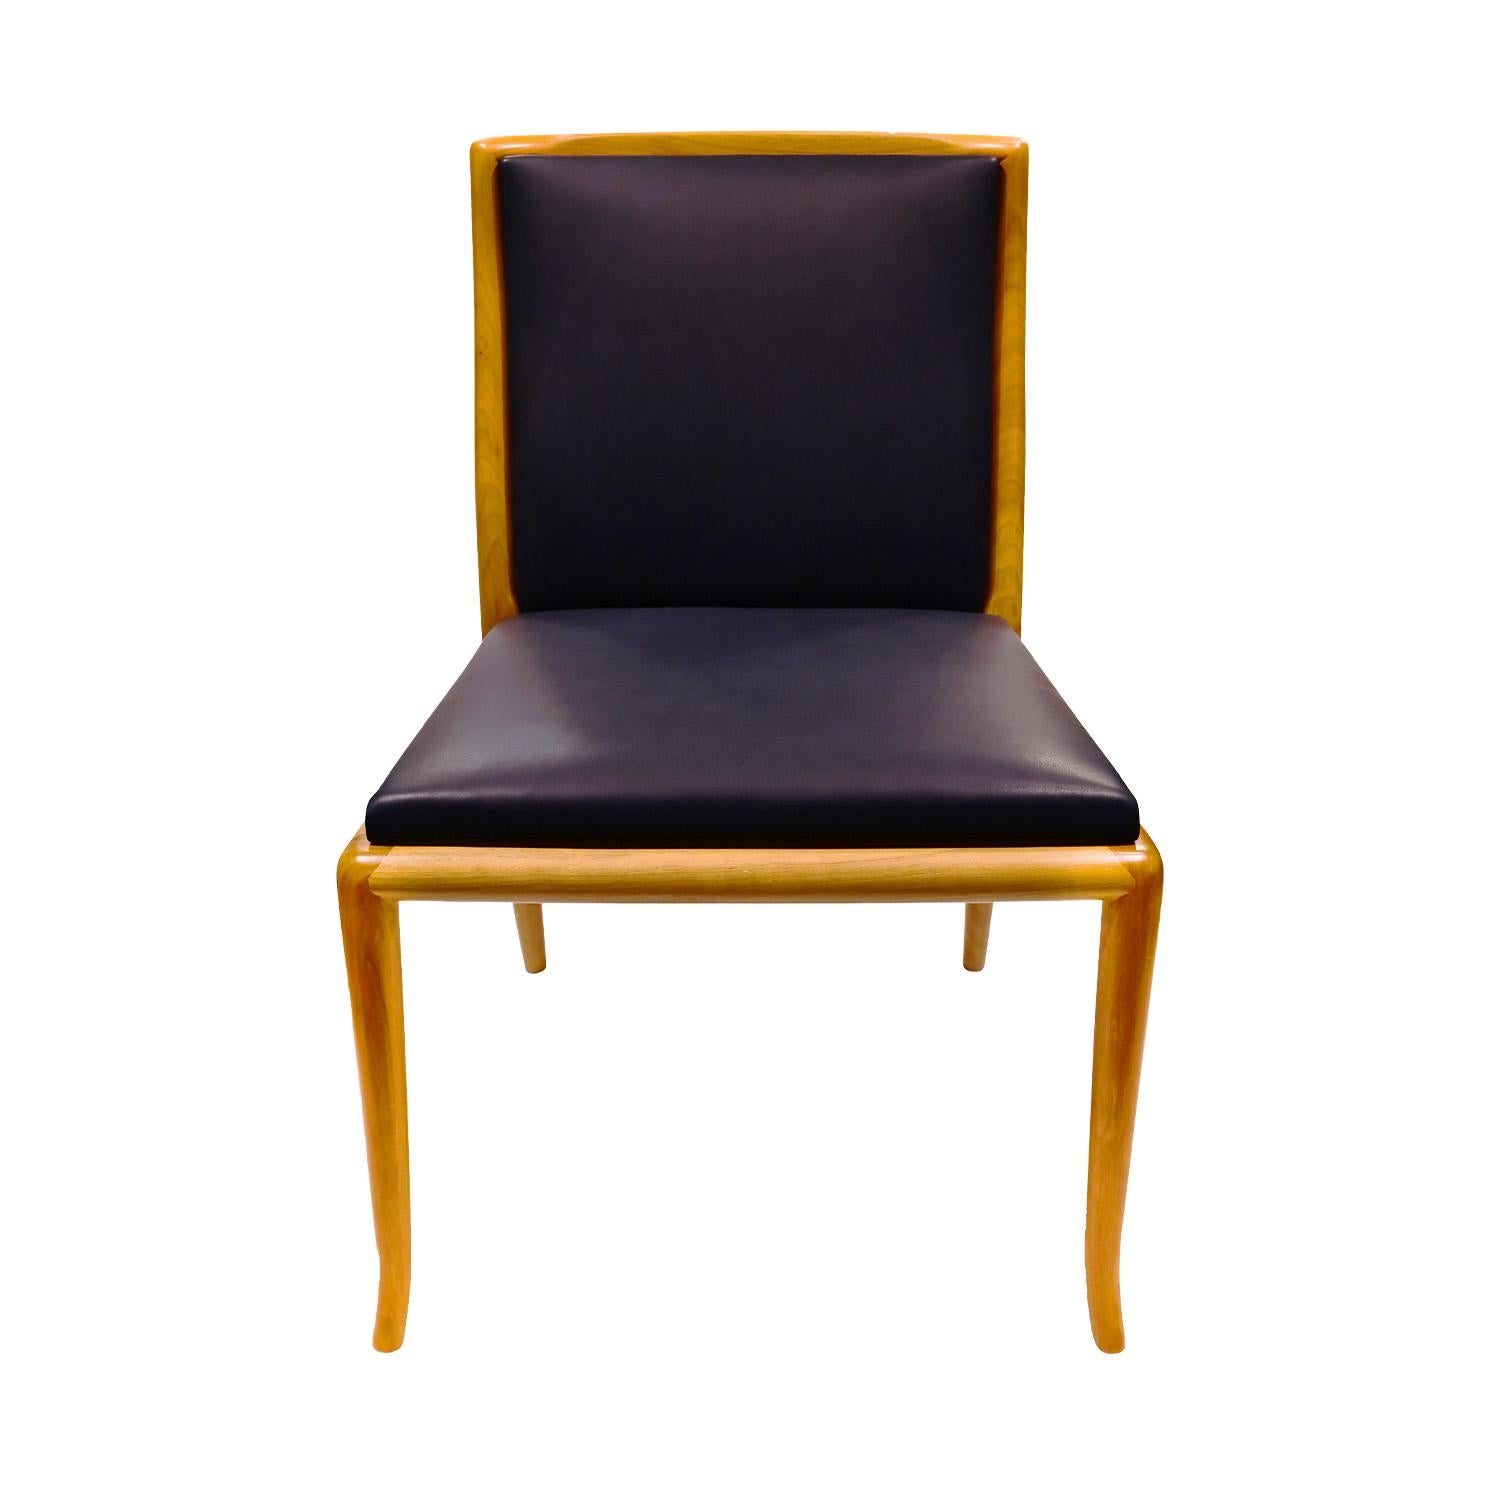 Hand-Crafted T.H. Robsjohn-Gibbings Elegant Set of 8 Dining Chairs 1950s For Sale